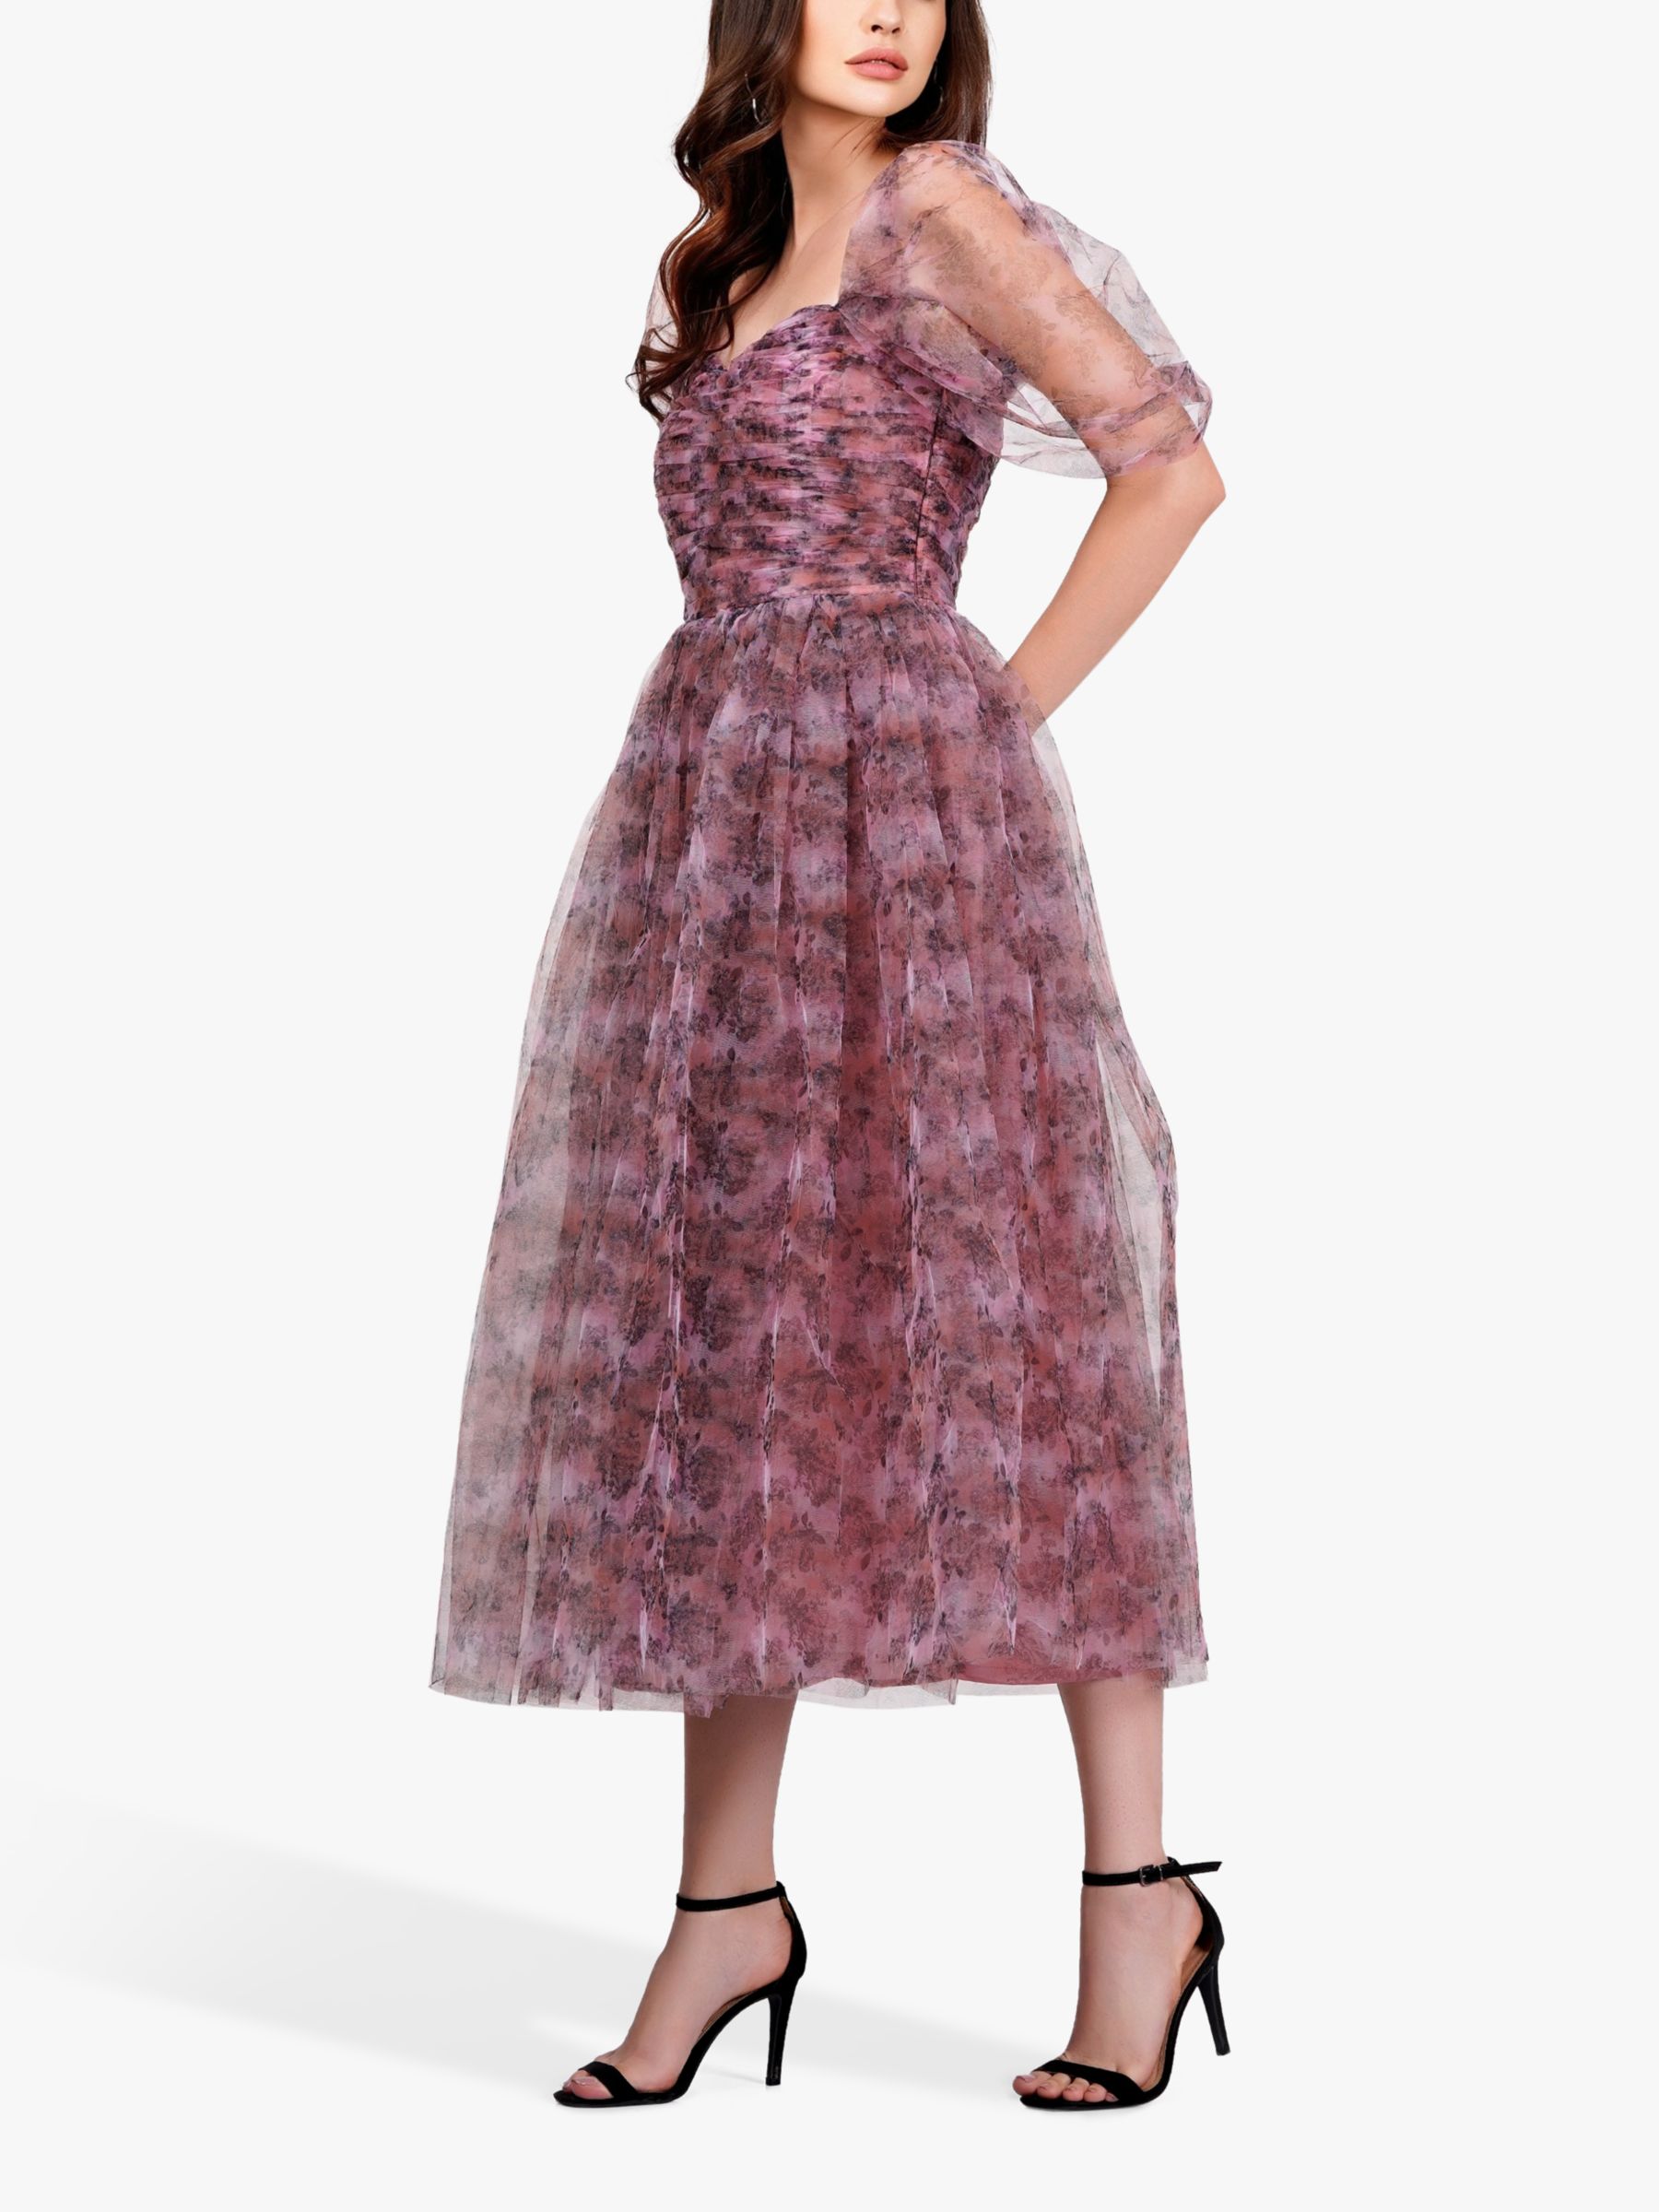 Lace & Beads Melbourne Tulle Midi Dress, Floral Pink, 6